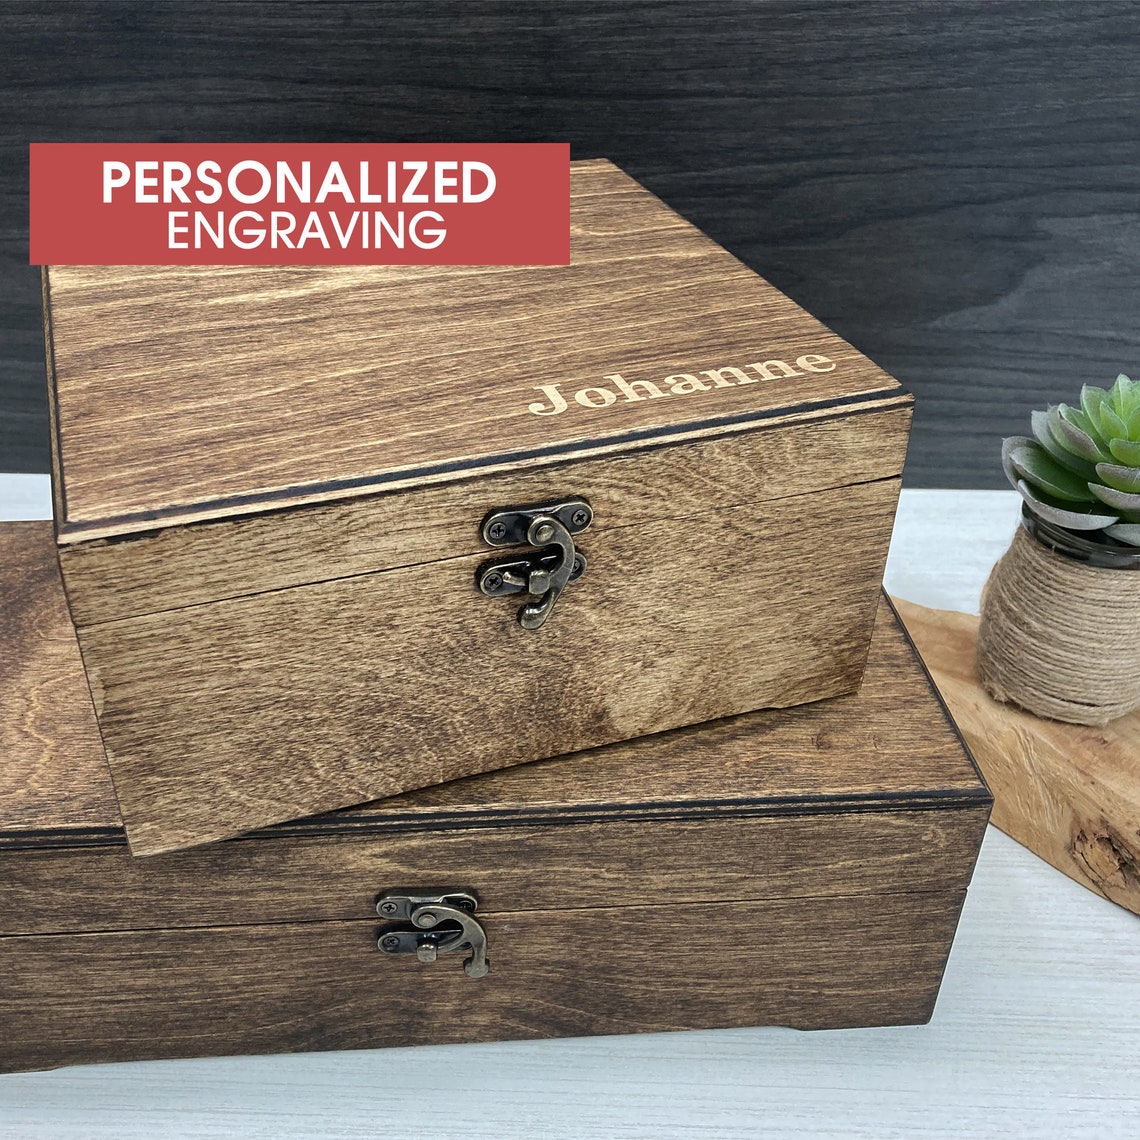 Personalized wooden box Personalized laser engraving | Etsy